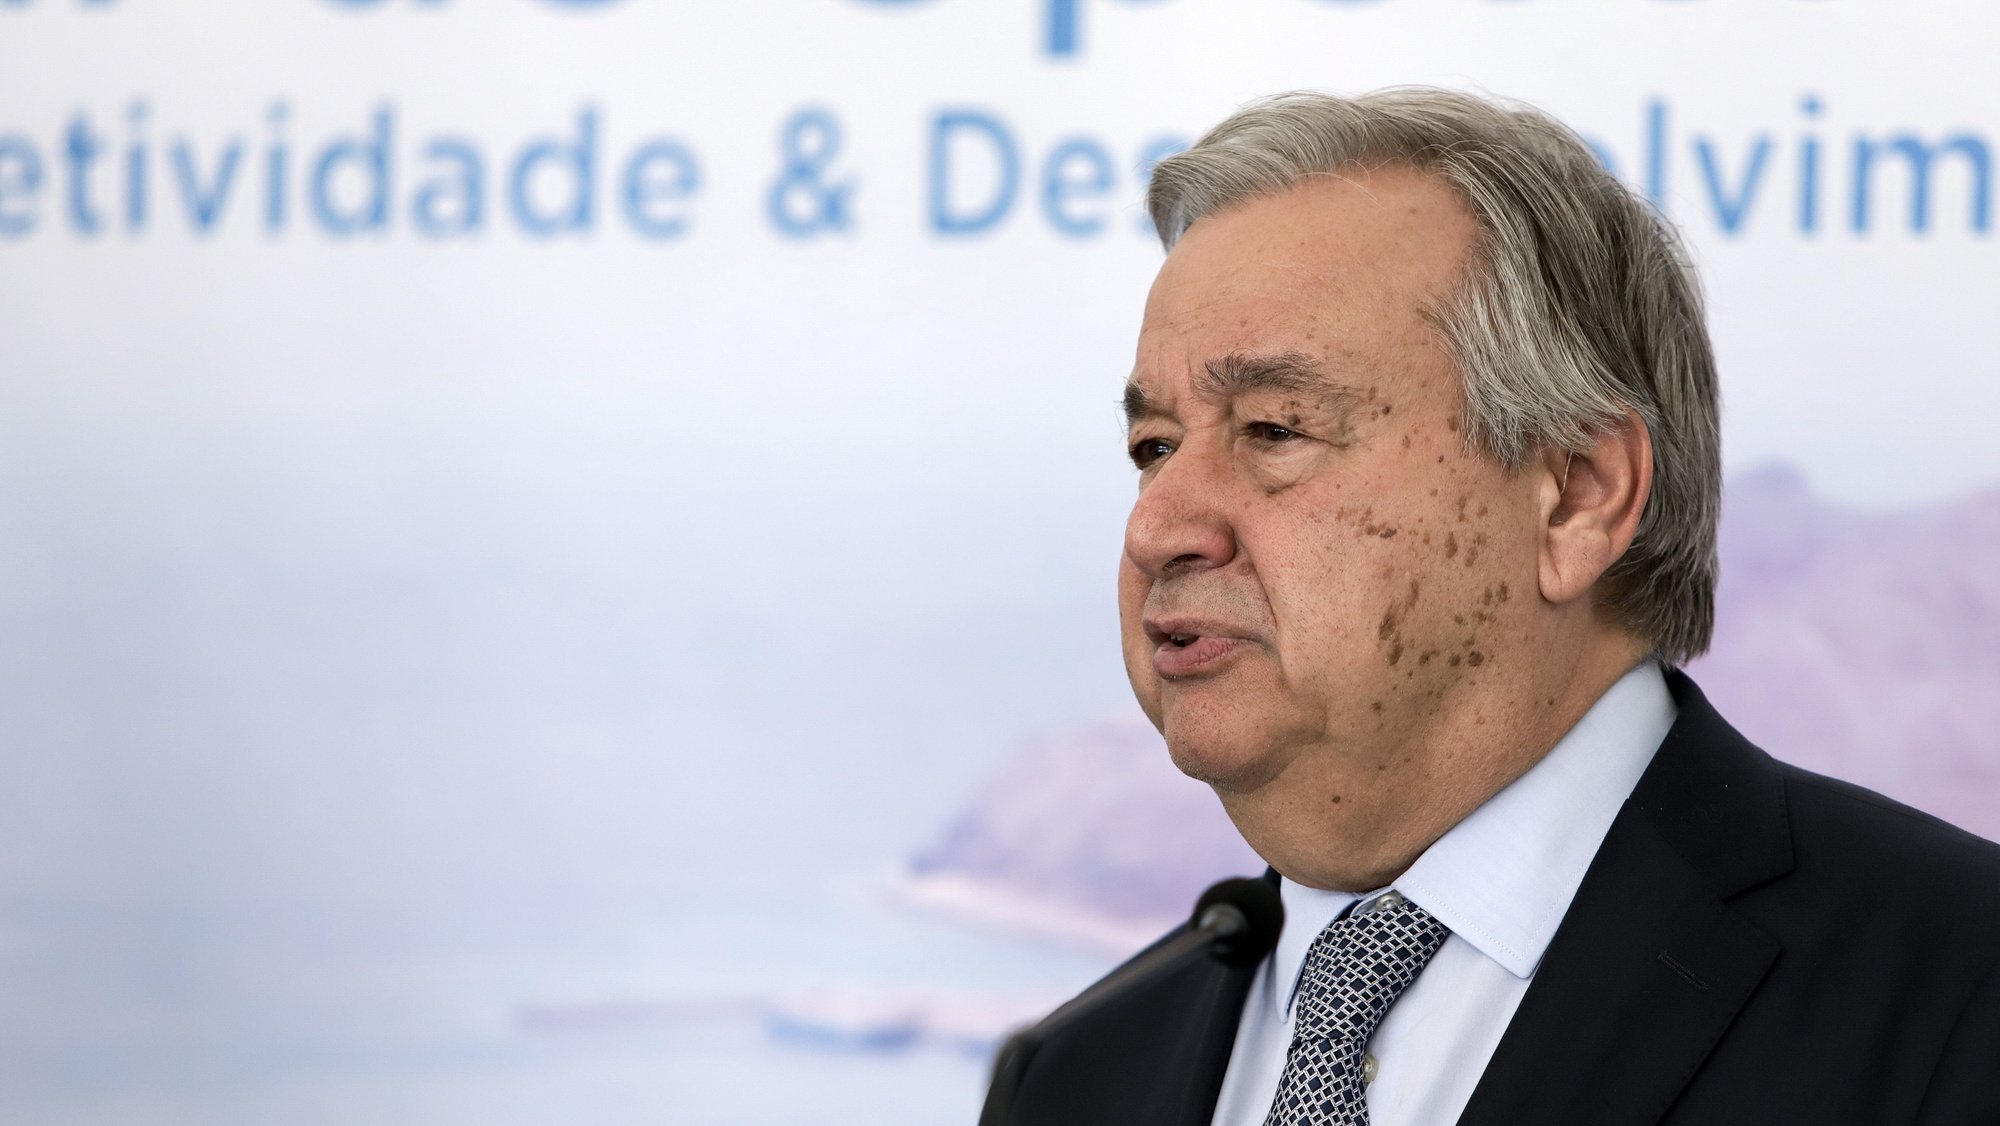 UN Secretary-General Antonio Guterres and Prime Minister of Cape Verde, Ulisses Correia e Silva (not pictured) during a joint press conference at the beginning of a three-day visit to the archipelago, Sao Vicente, 21 January 2023. ELTON MONTEIRO/LUSA